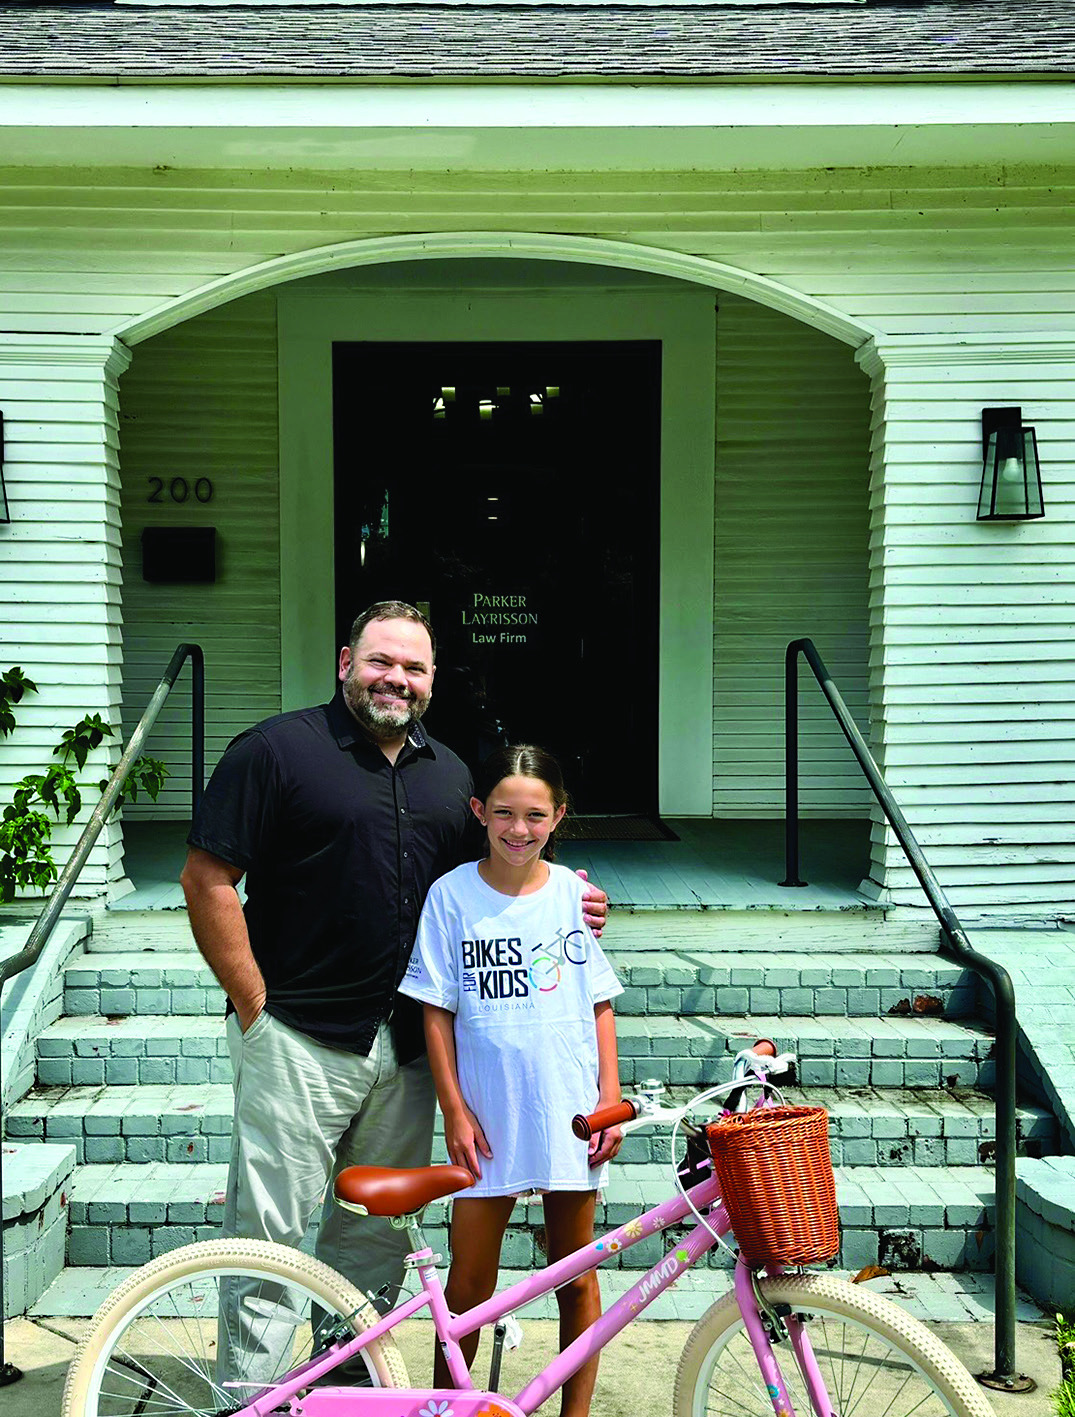 Bikes for Kids winner Adeline Gaudin, 8, and Parker Layrisson (Courtesy Photo)